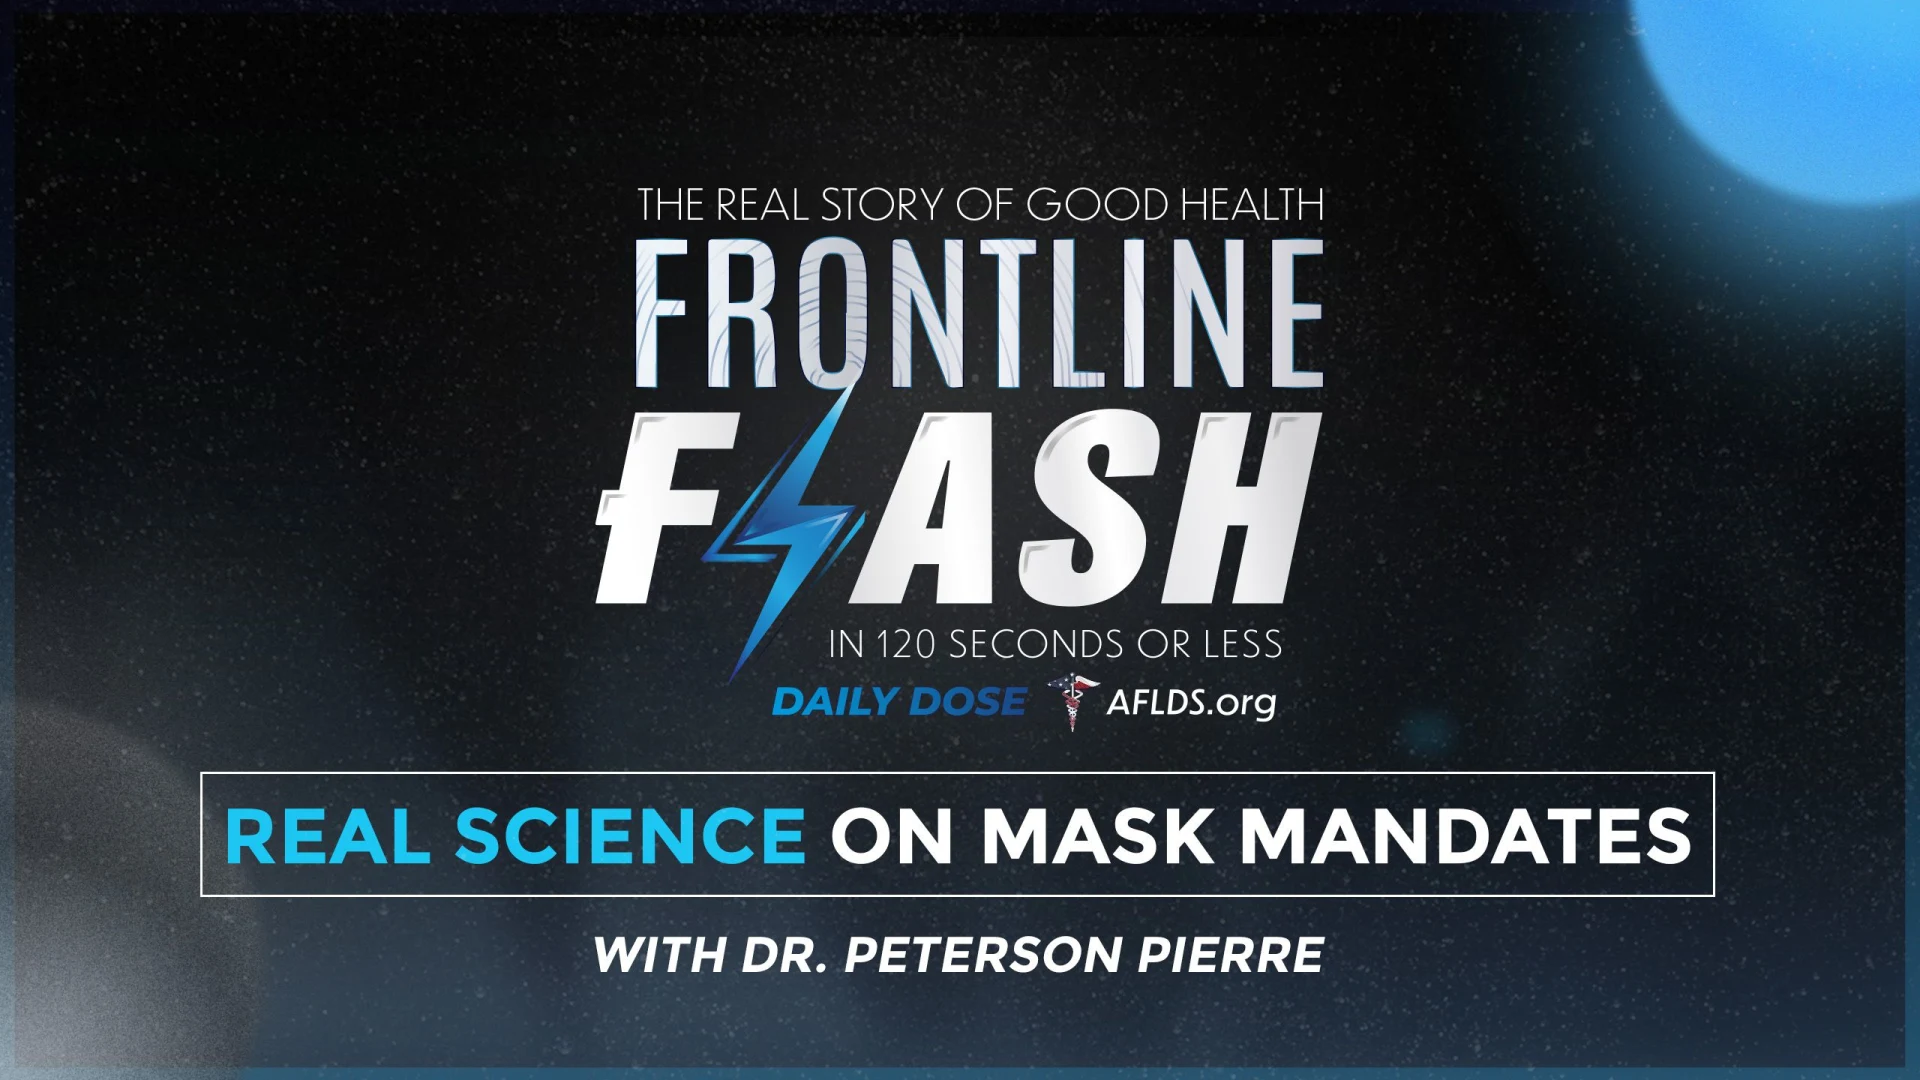 Frontline Flash™ Daily Dose: ‘Real Science on Mask Mandates’ with Dr. Peterson Pierre